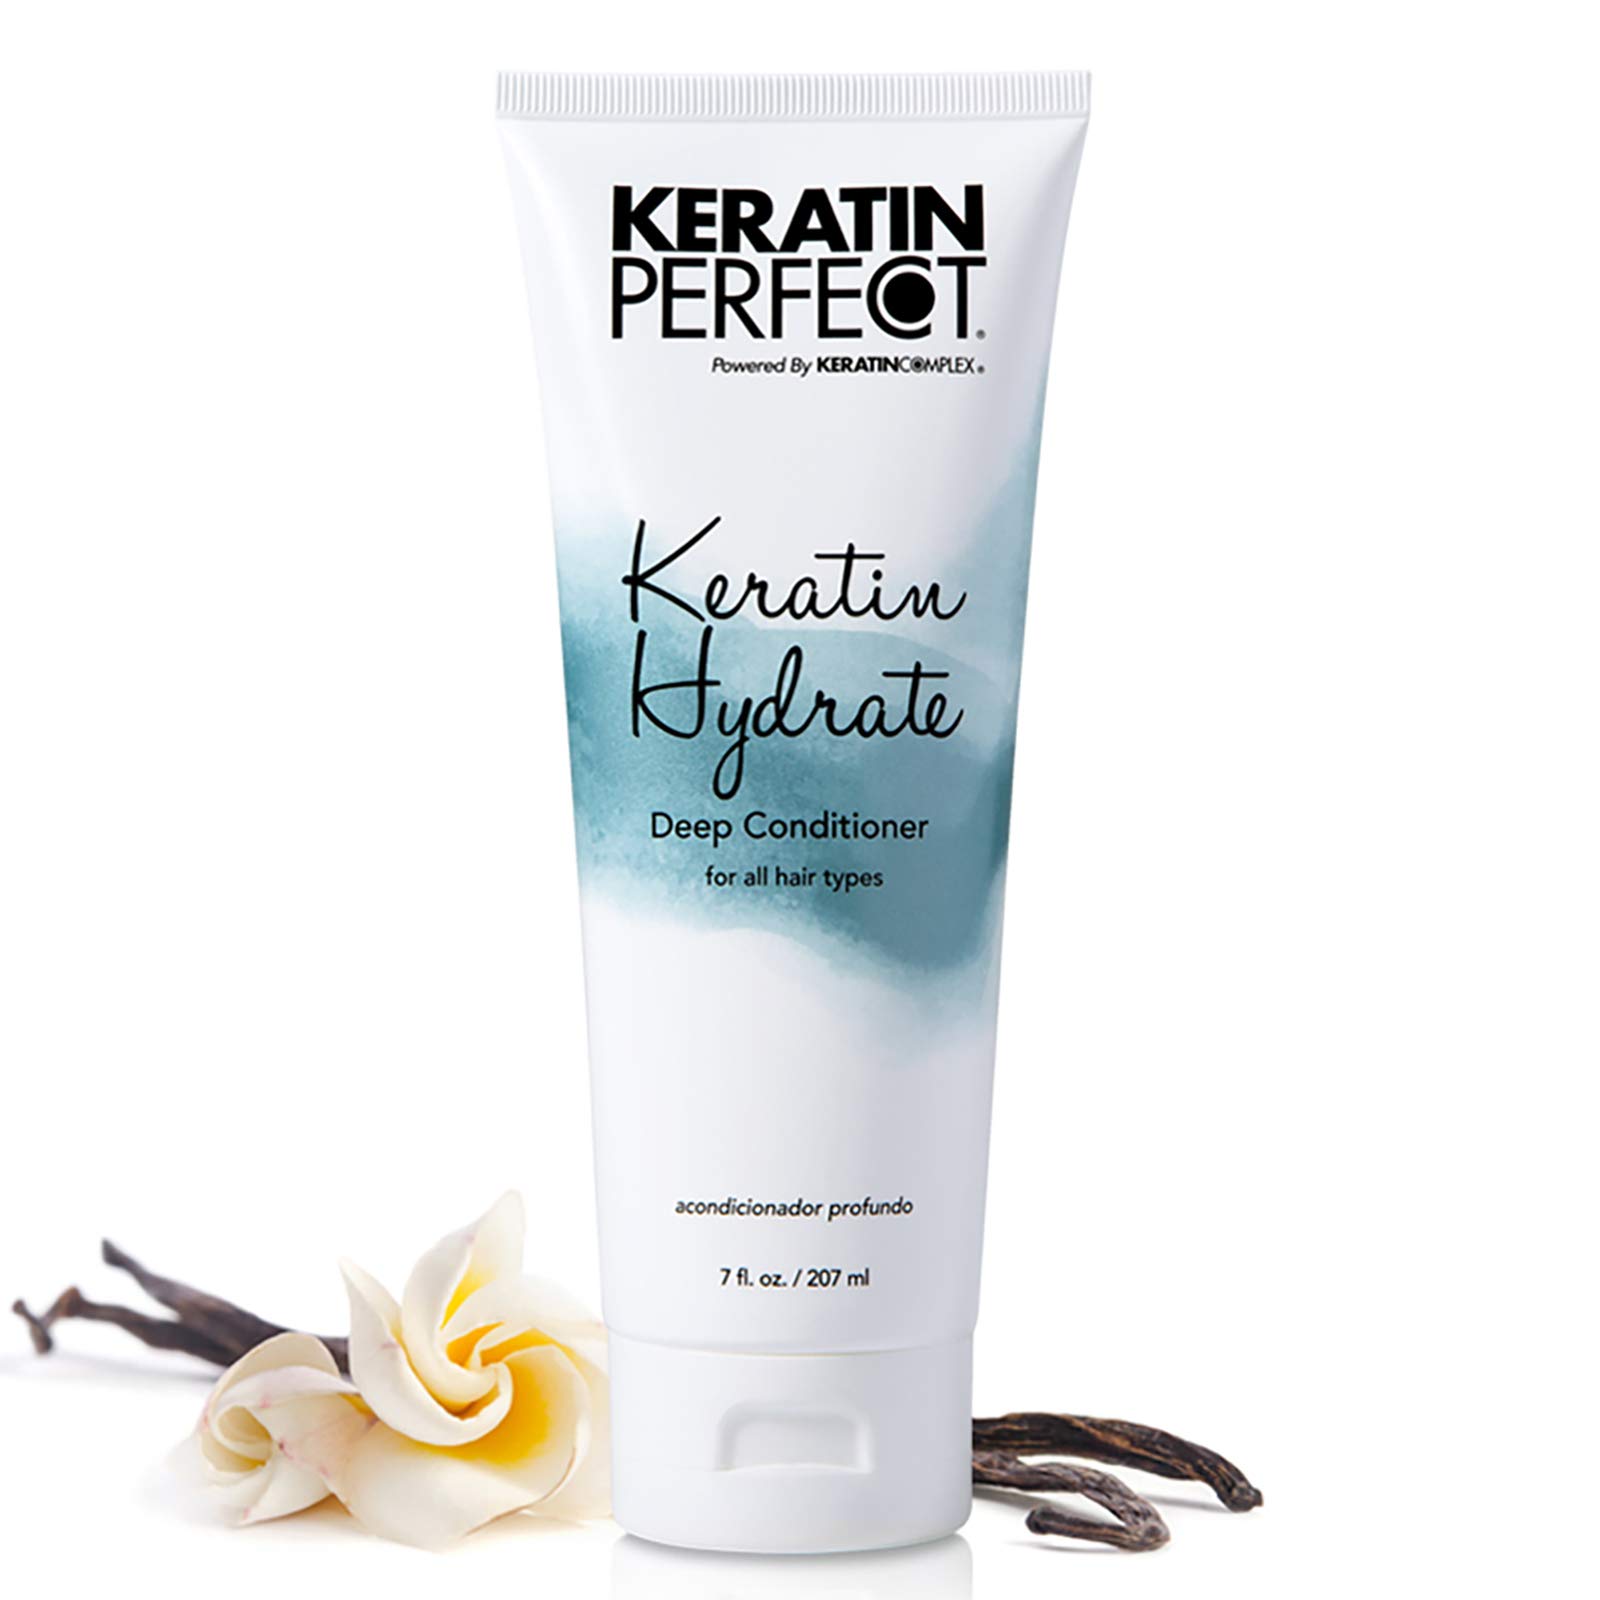 Keratin Perfect Hydrate Deep Conditioner - Salon Level Treatment For Women - Hydrating Formula Improves Hair Over Time - Restores Moisture, Elasticity And Shine - Suitable For All Hair Types - 7 Oz